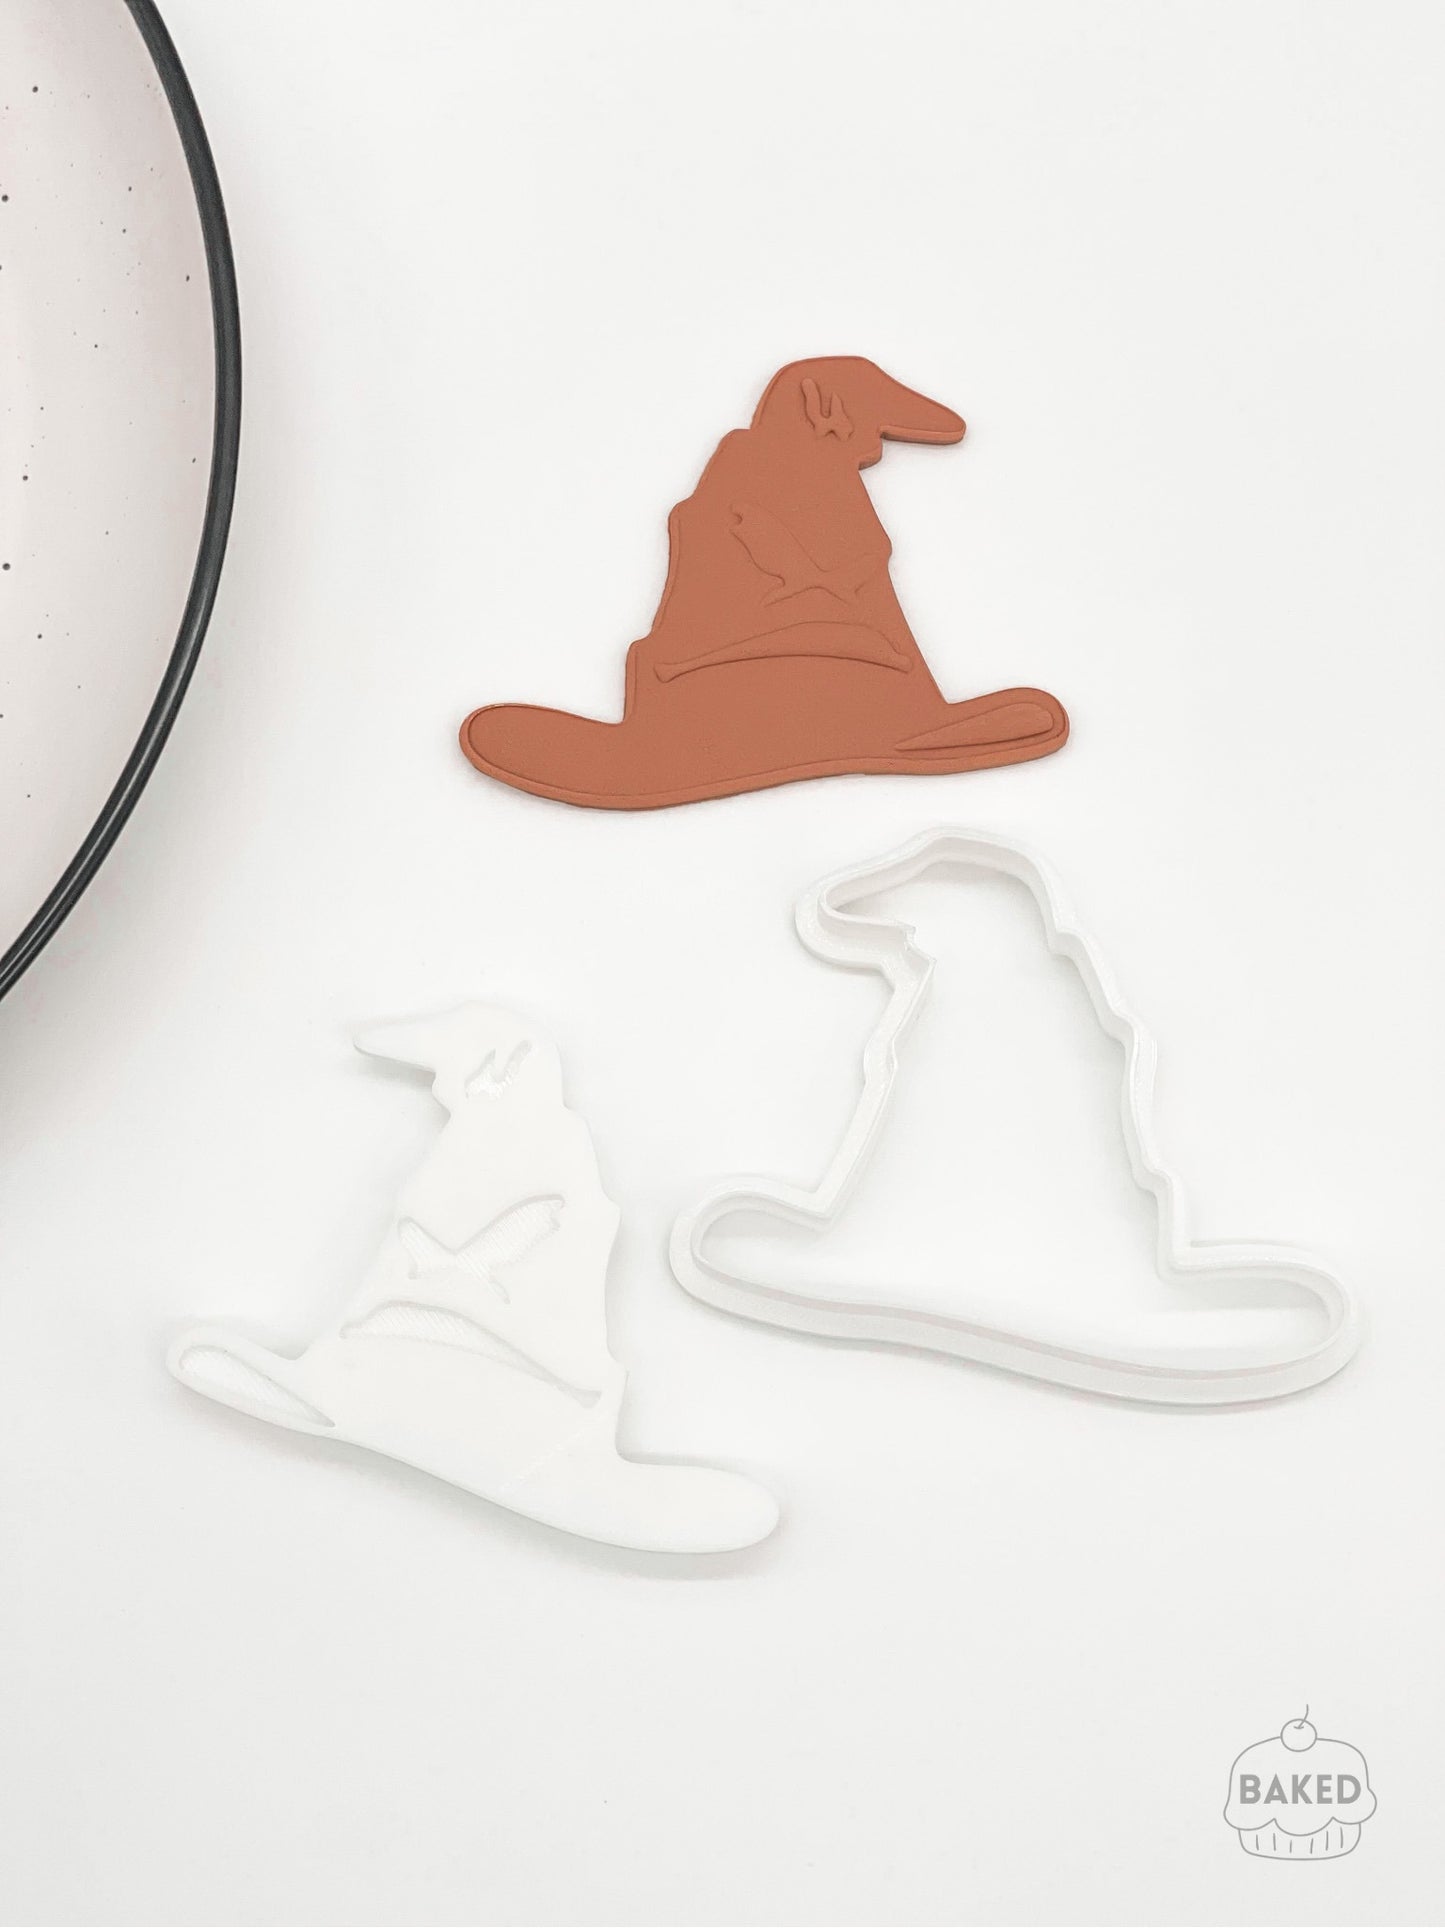 HP Sorting Hat 'Burst' Cookie Stamp and Cutter